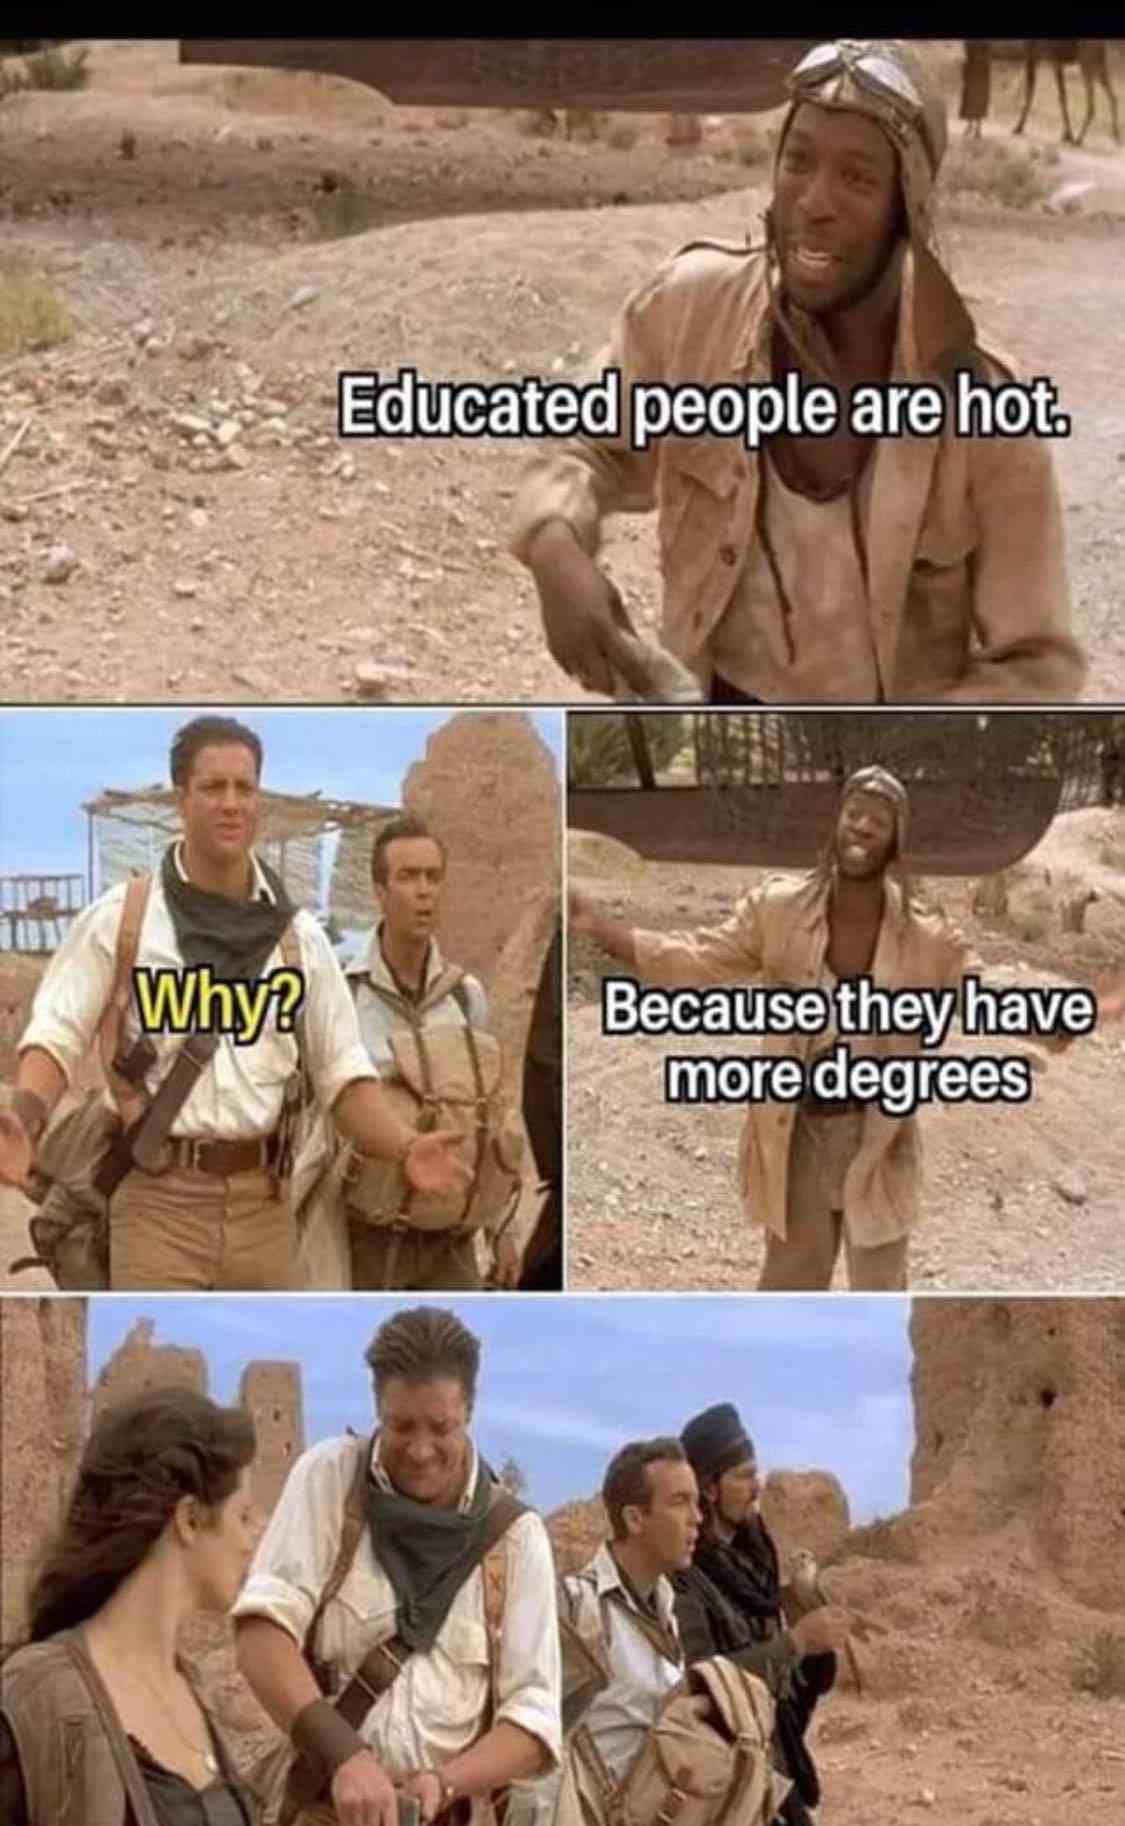 Educated people are hot